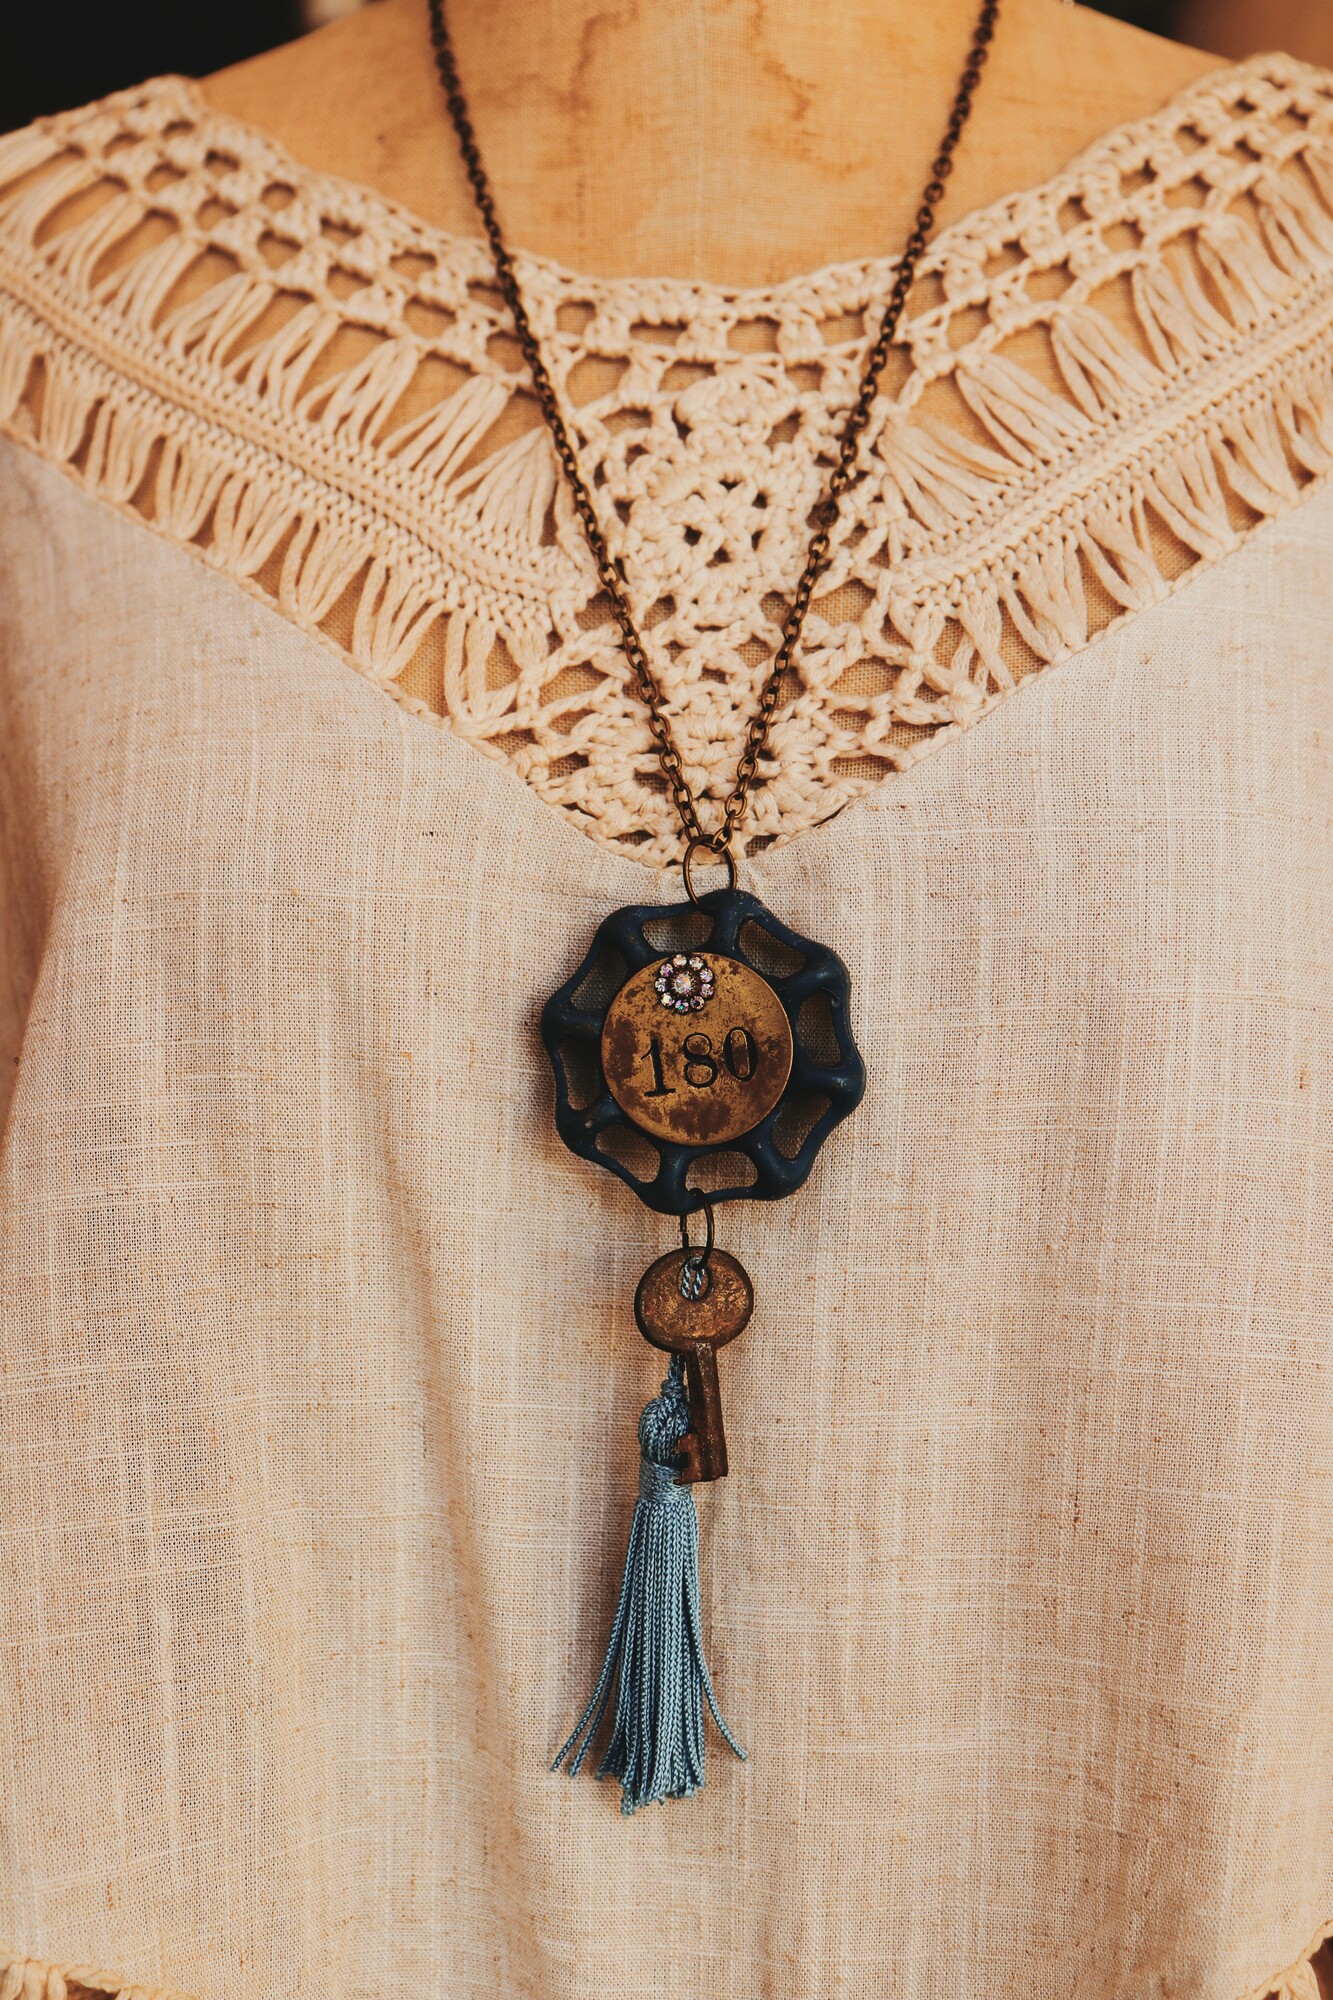 This unique necklace's pendant is a blue faucet knob with a brass plate engraved with 180. It also includes a brass key and blue tassle. It is on a 16 inch chain.